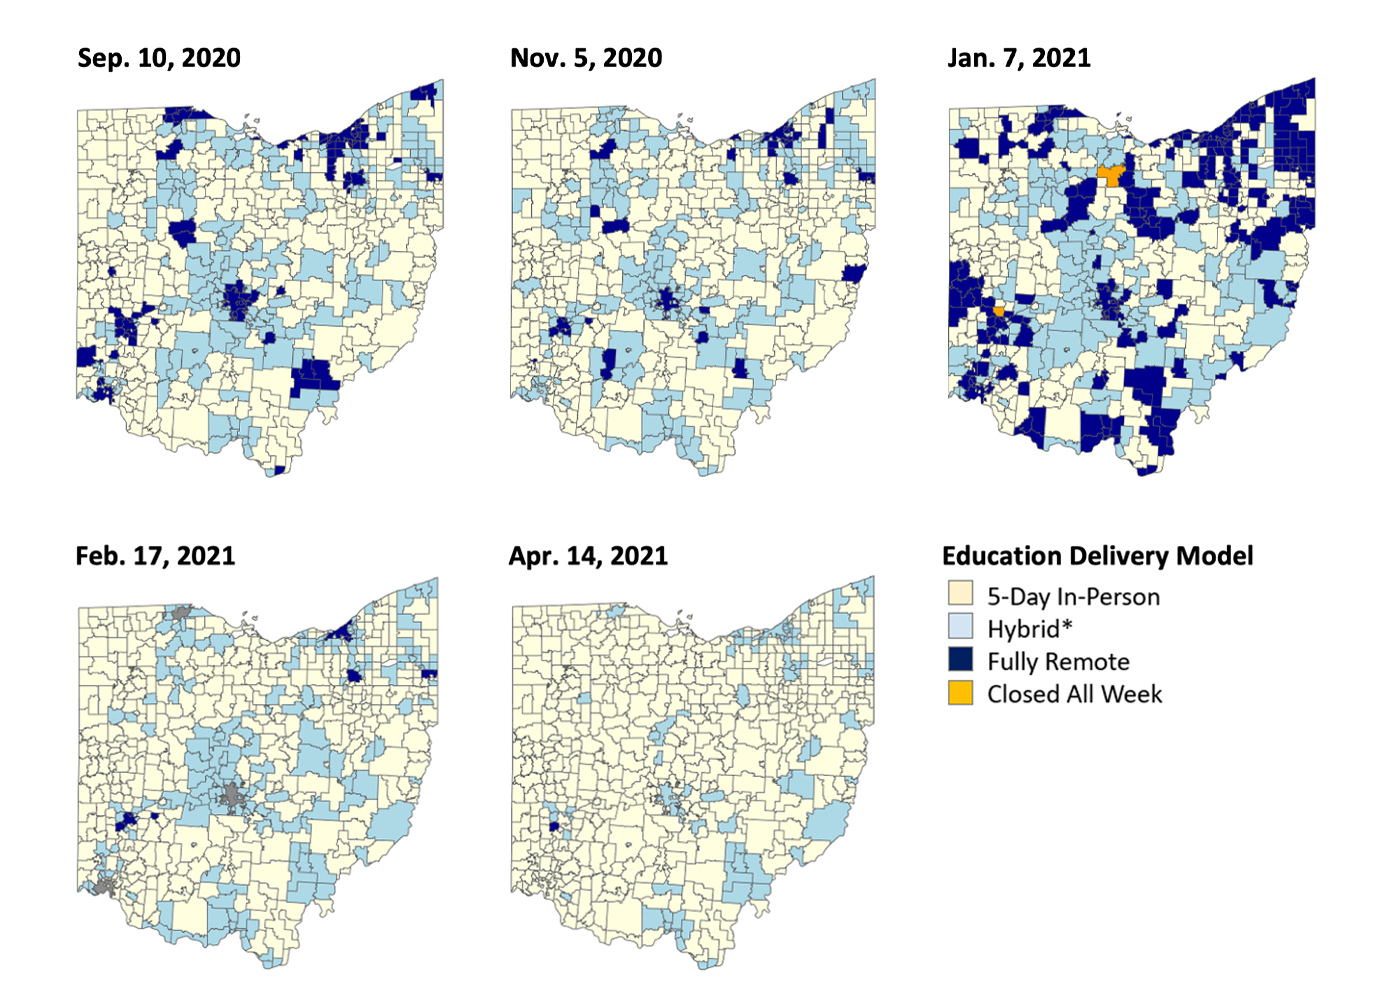 Maps of Education Delivery Models for Sep. 10, 2020, Nov. 7, 2020 and Jan. 7, 2021